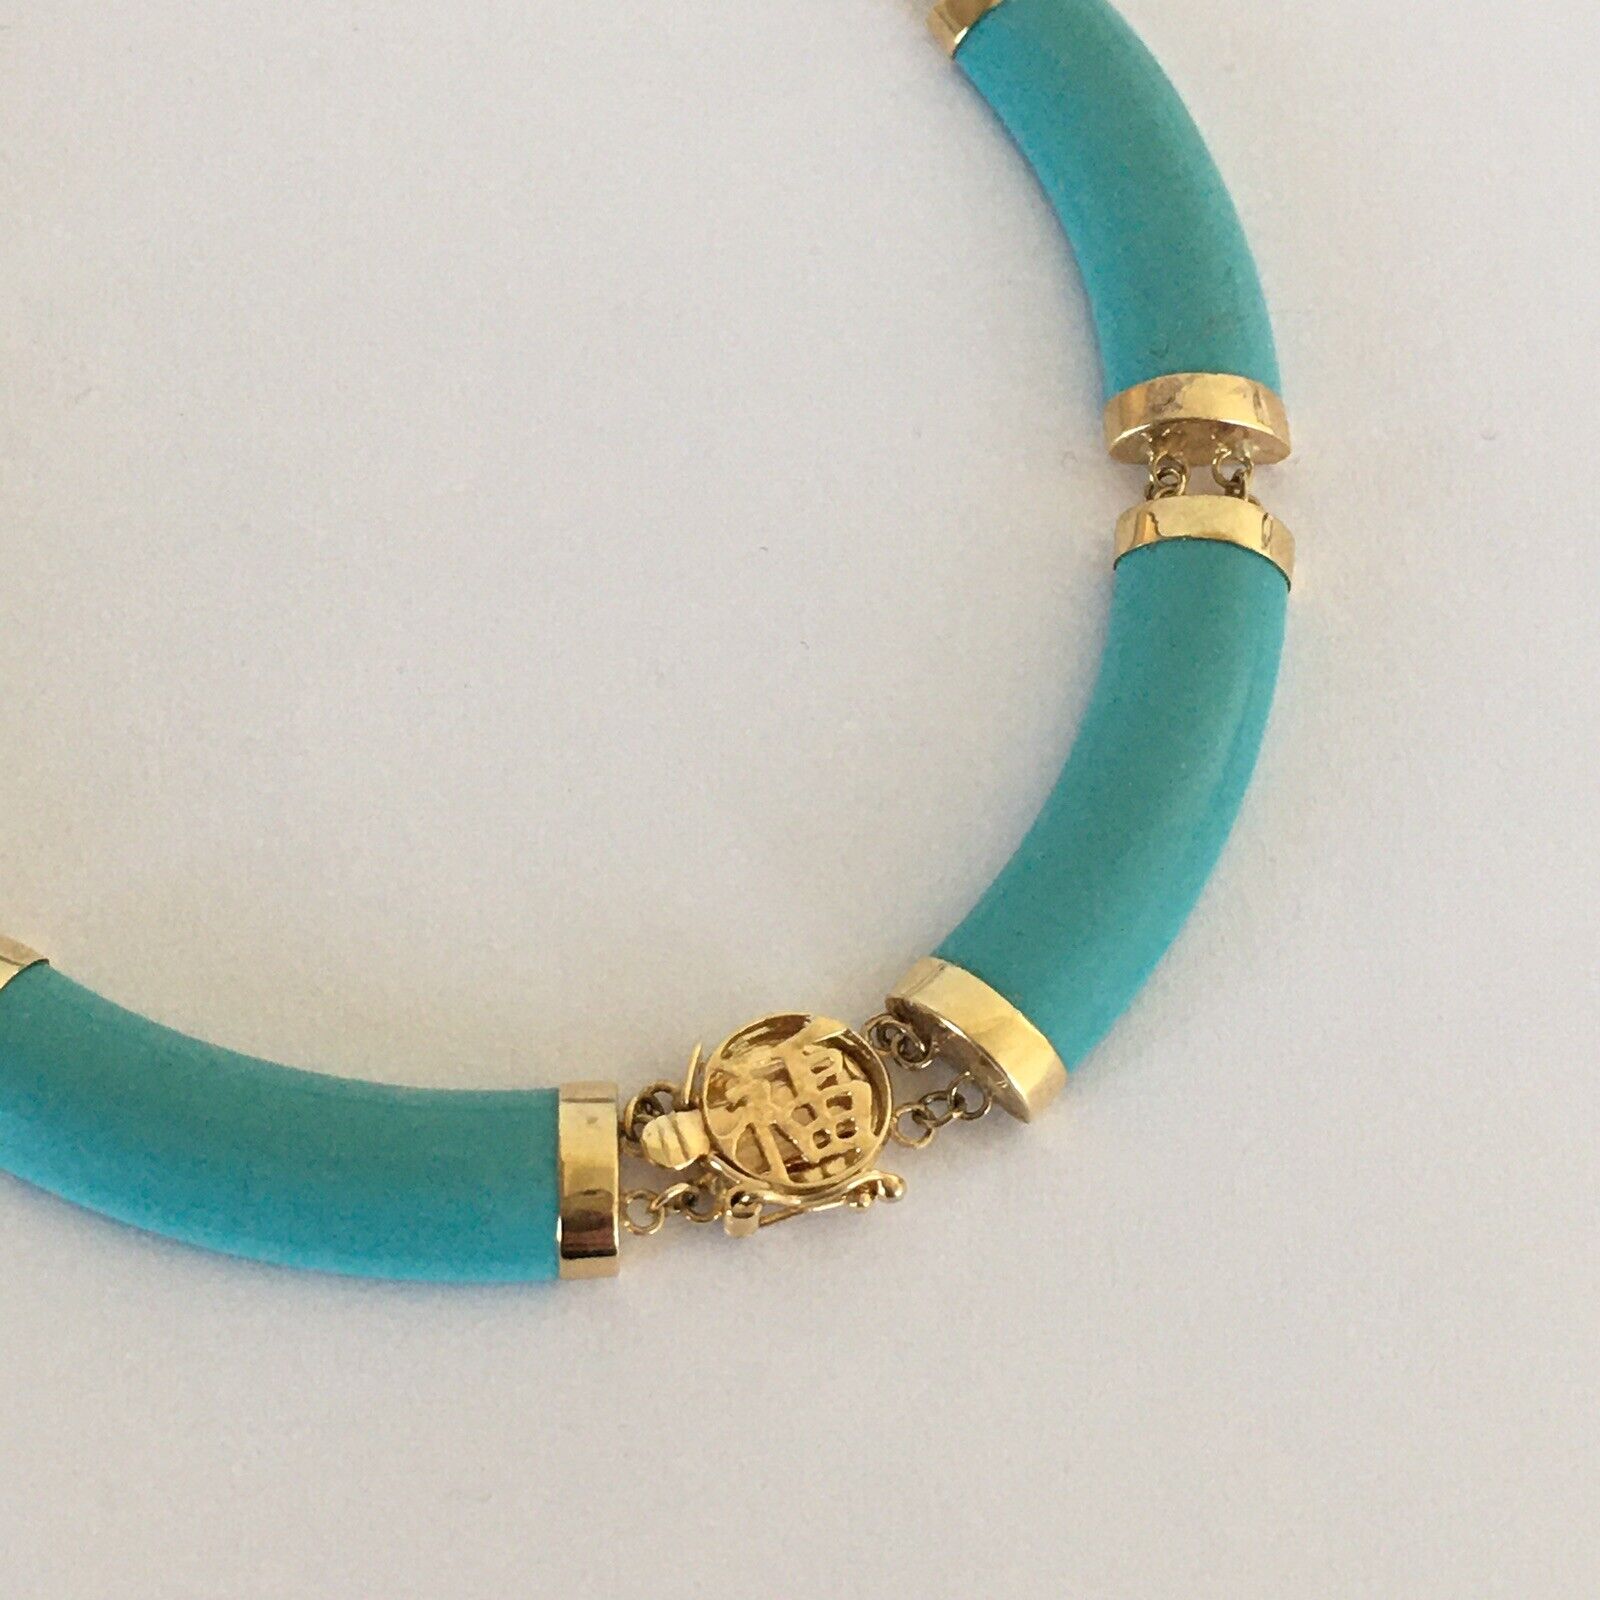 P-058560 New 14k Solid Yellow Gold Unique Turquoise Bamboo Necklace,  “happiness” Clasp